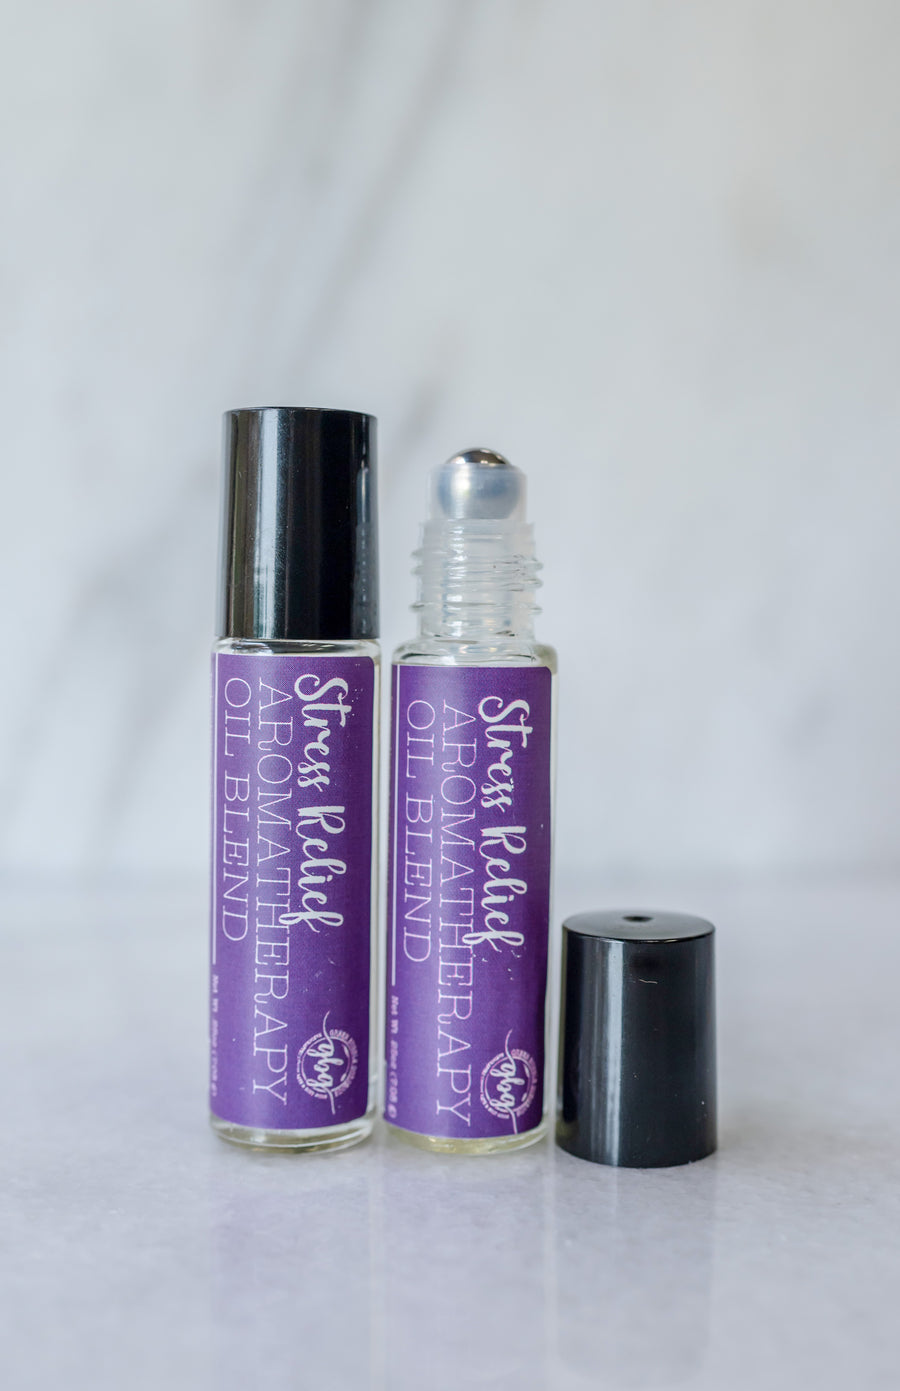 Stress Relief Aromatherapy Roll On